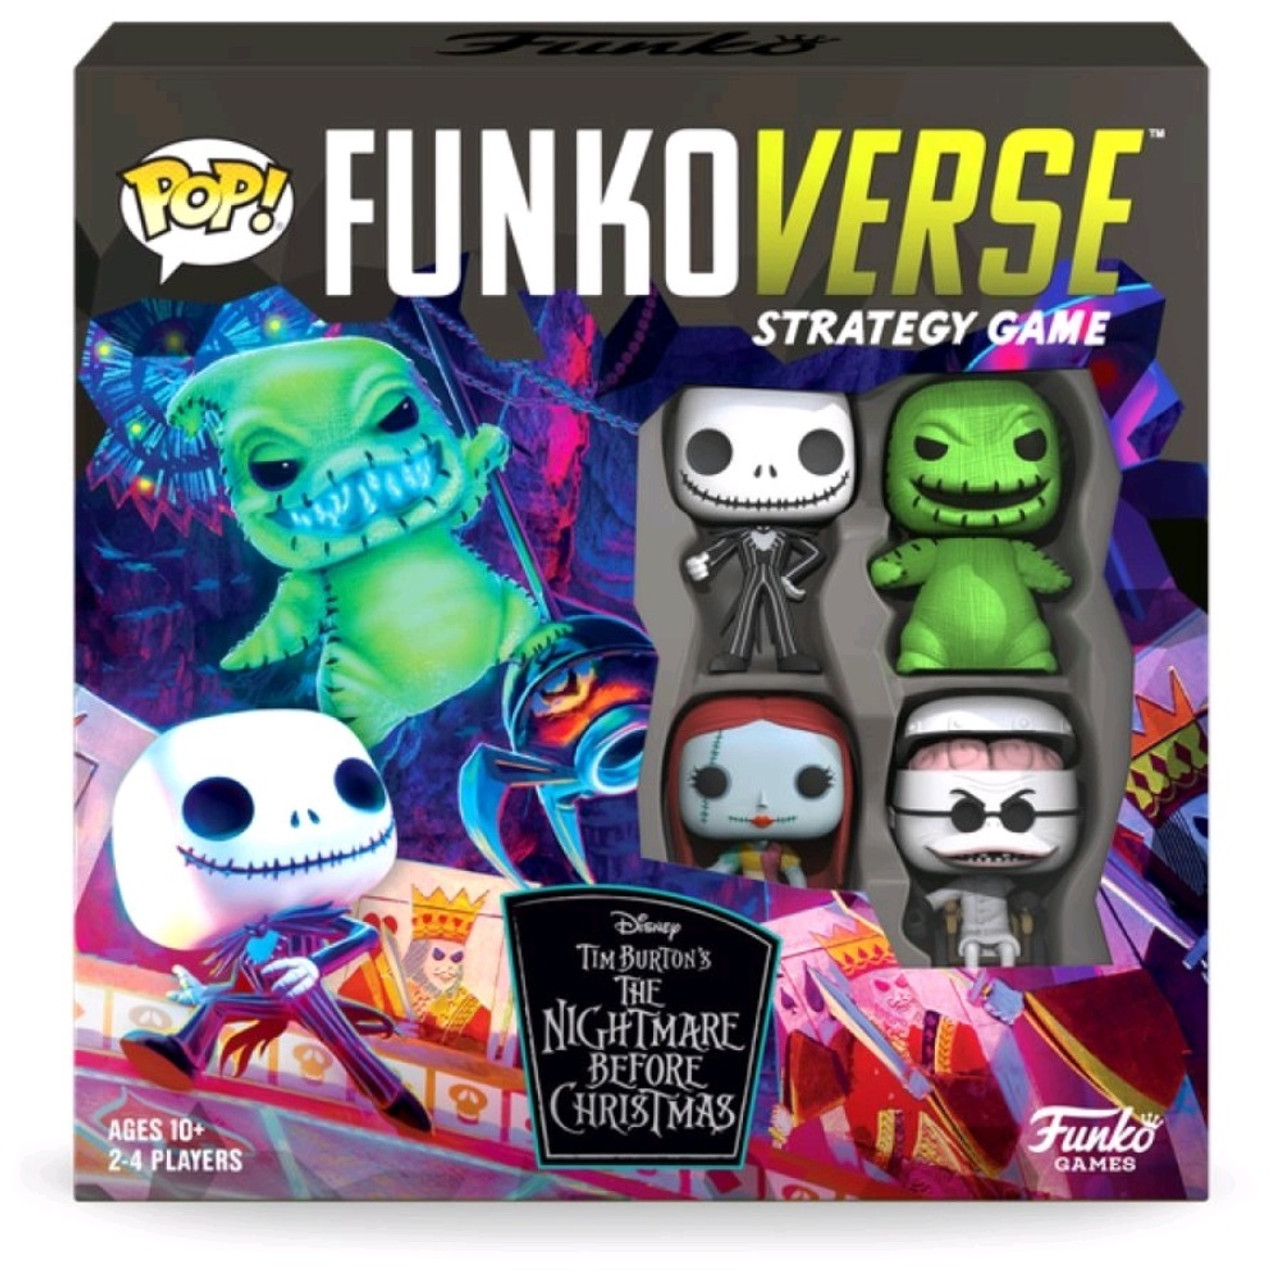 Funkoverse Nightmare Before Christmas Game